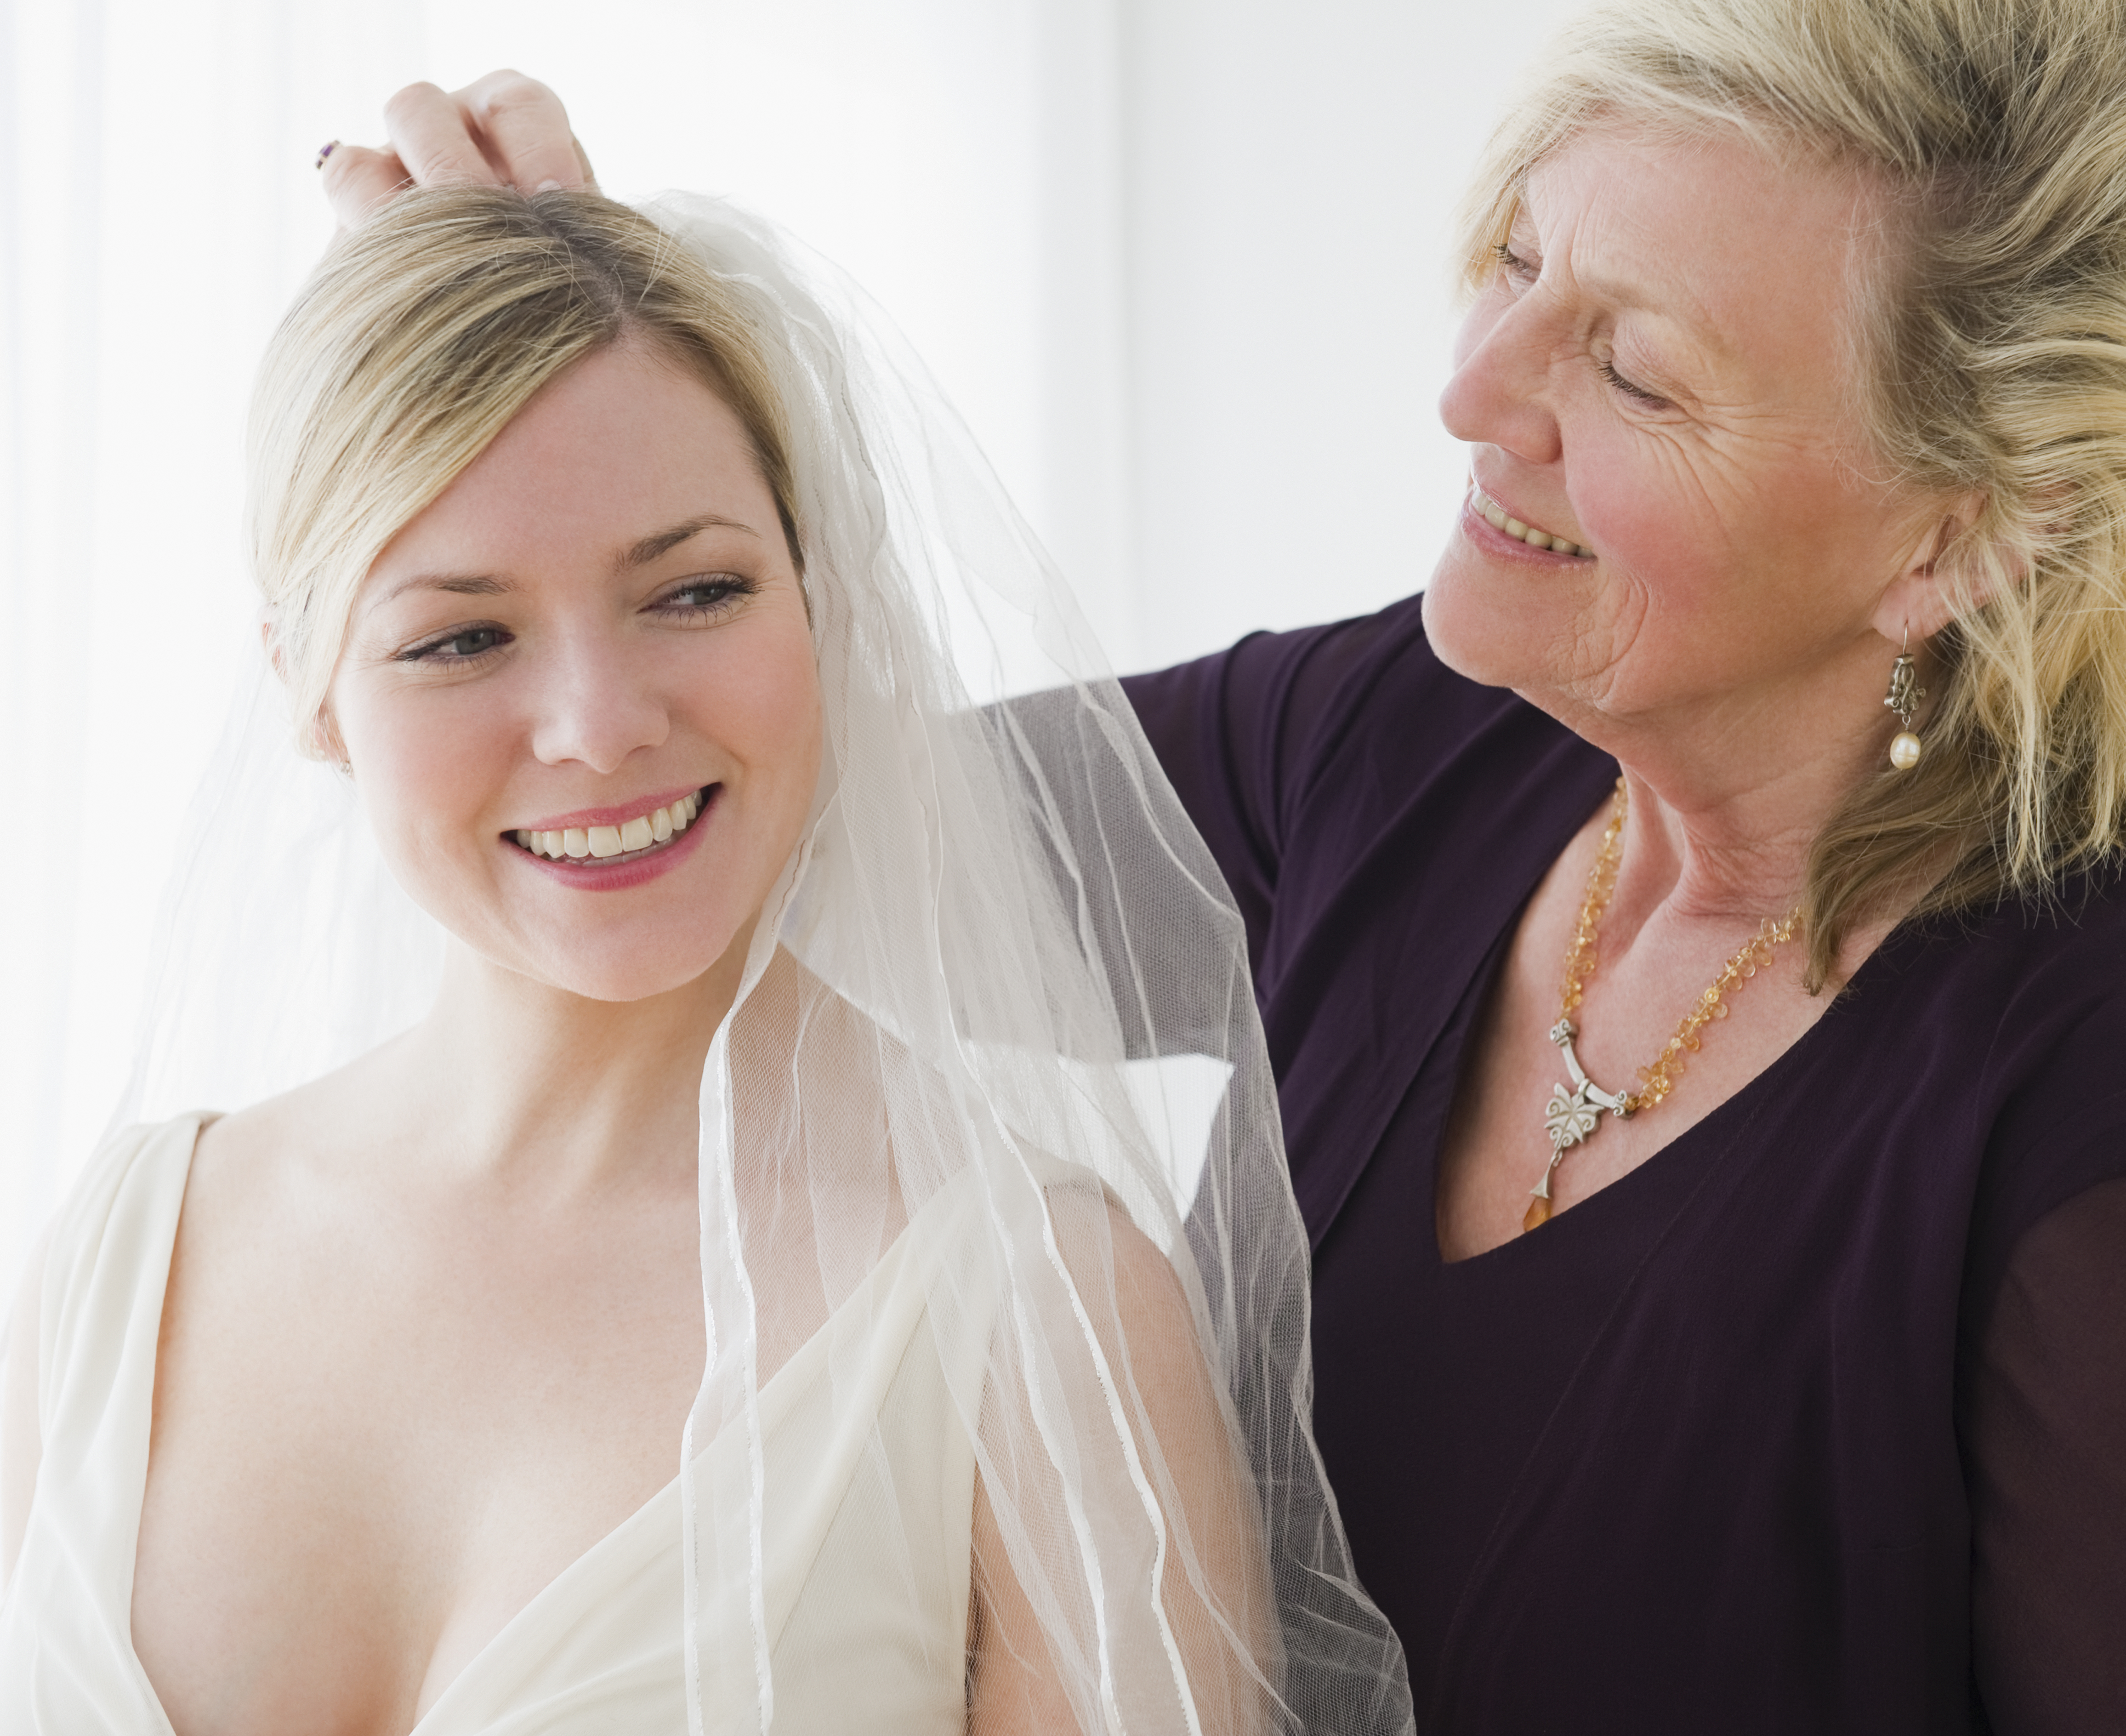 An older woman helping a younger woman try on a wedding dress | Source: Getty Images